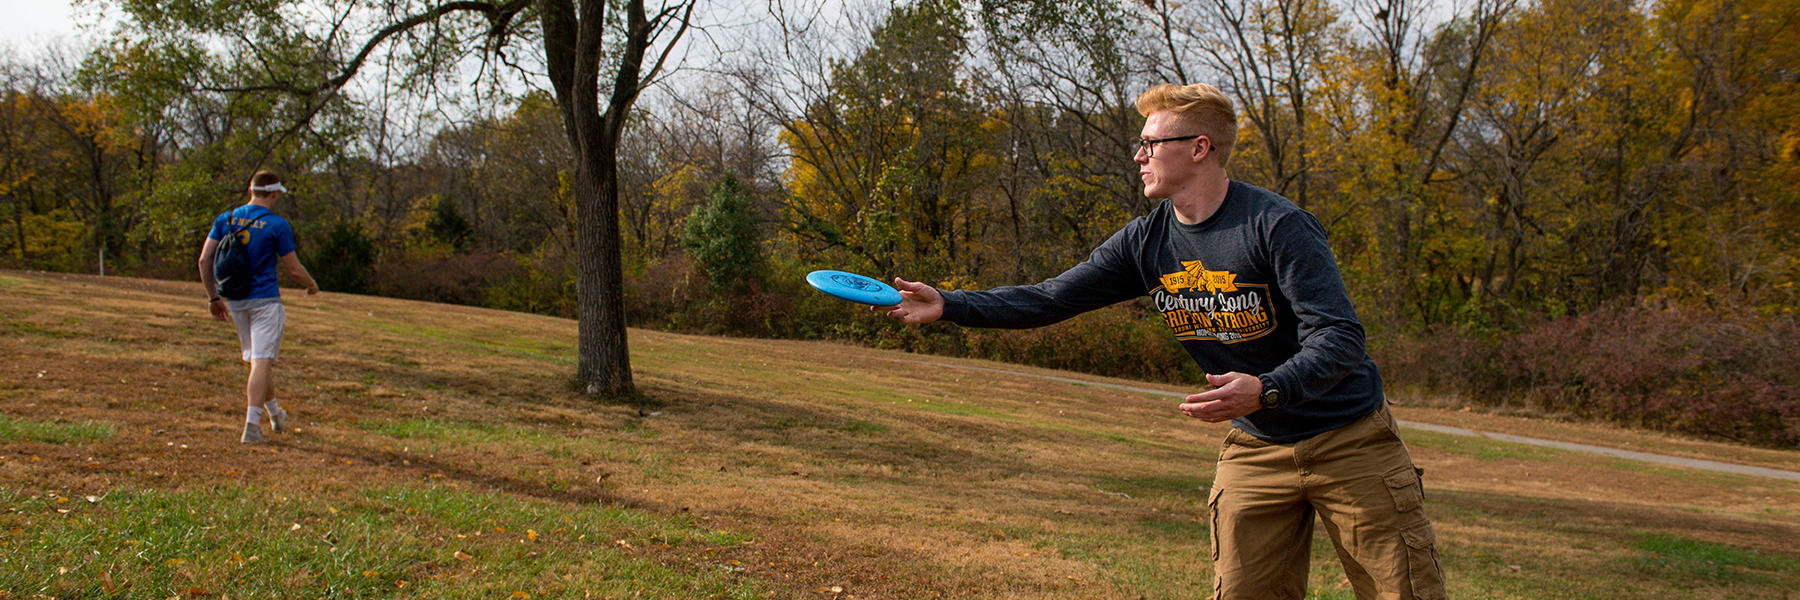 two students passing a frisbee